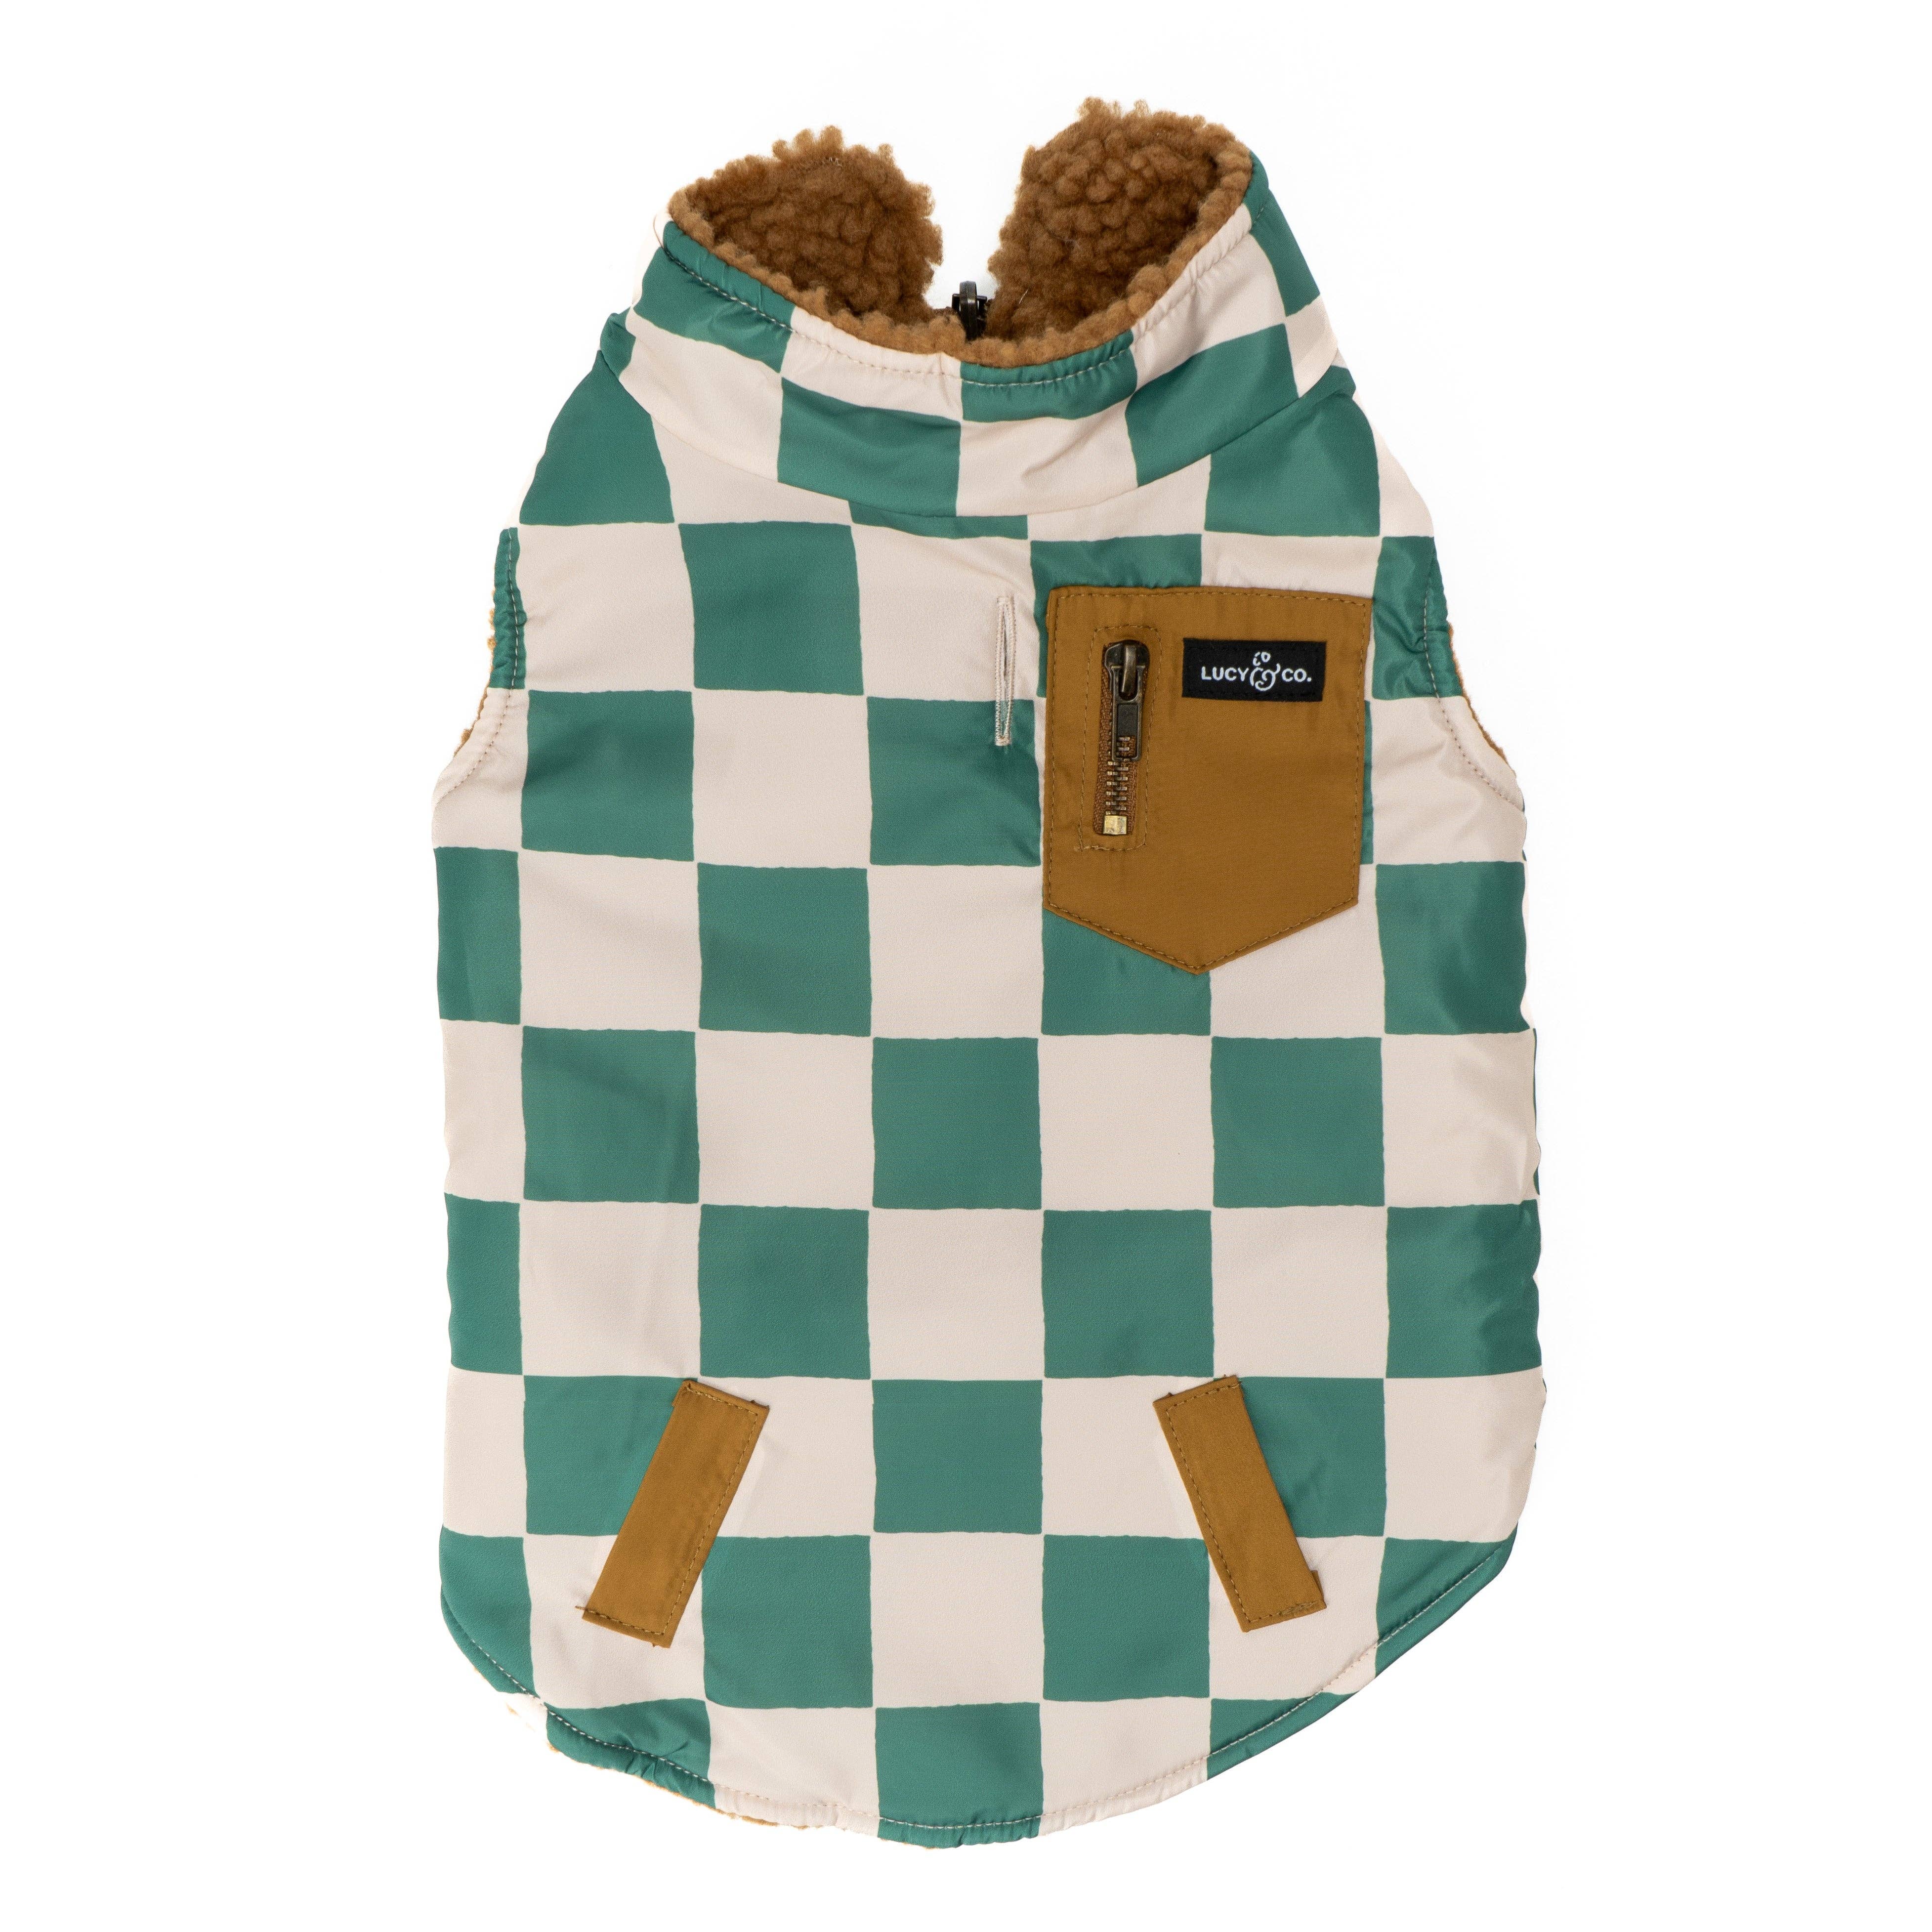 The You're a Square Reversible Teddy Vest: 2XL